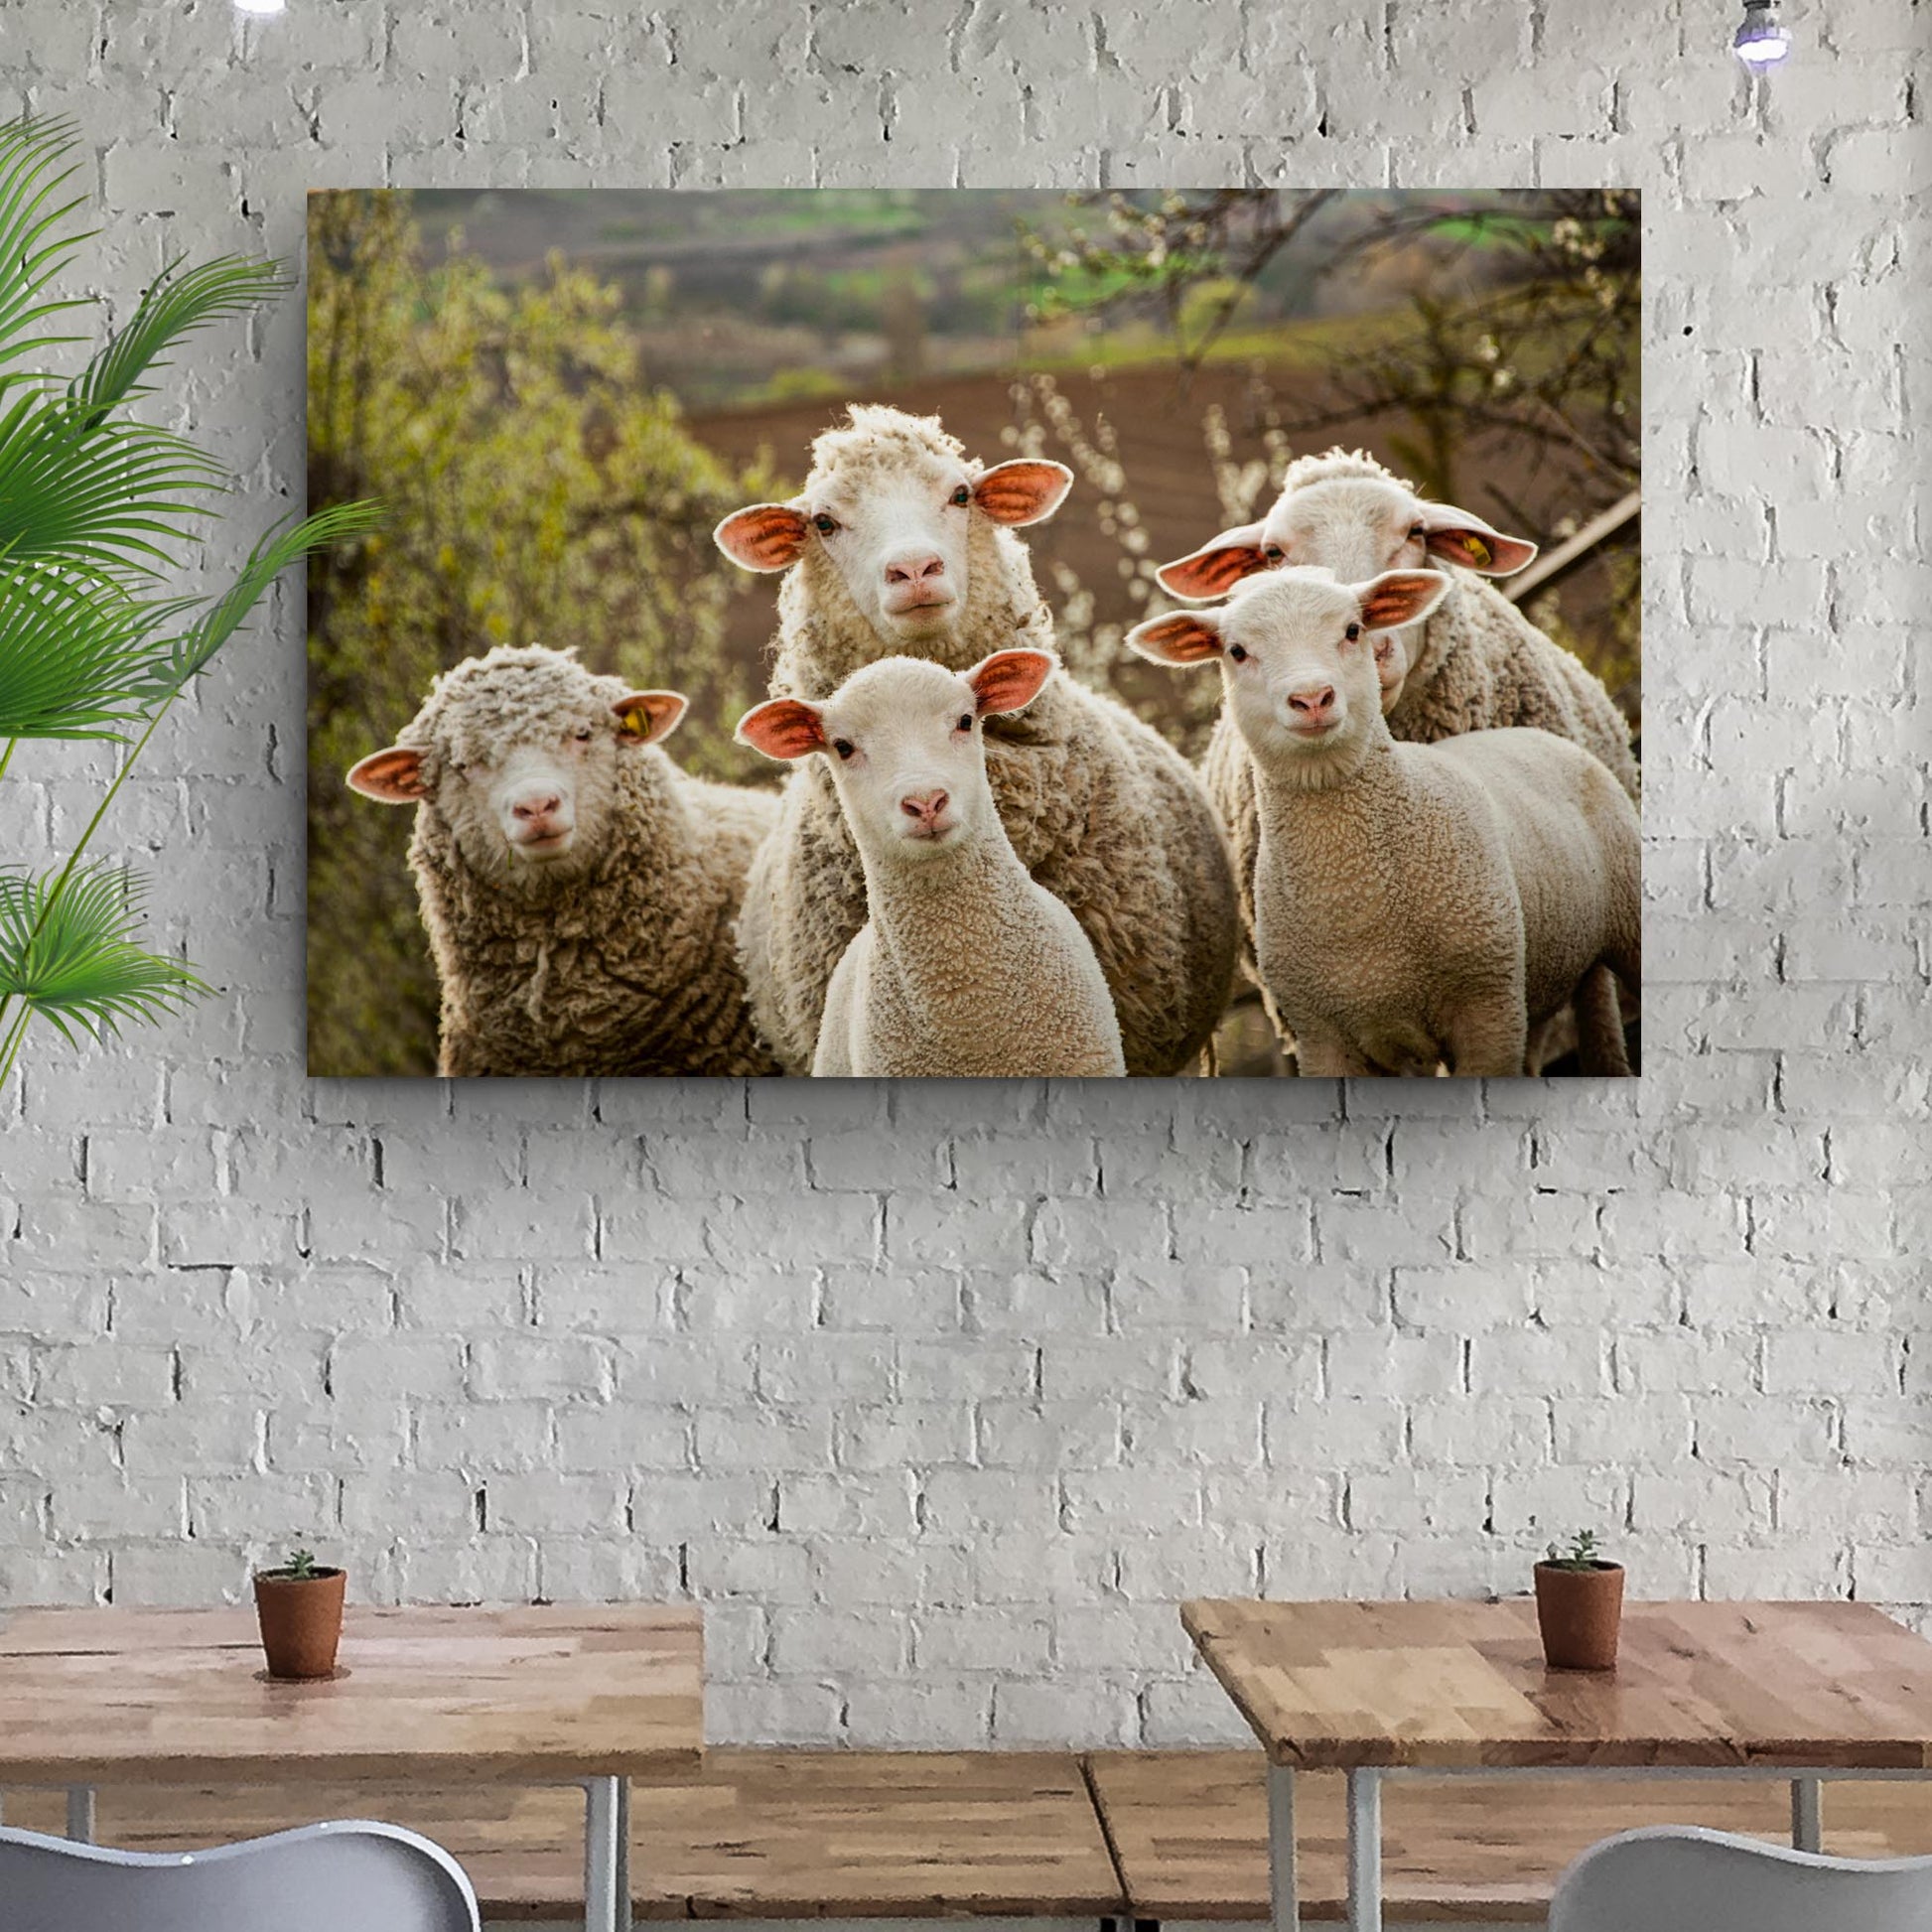 Curious Sheep Canvas Wall Art Style 2 - Image by Tailored Canvases